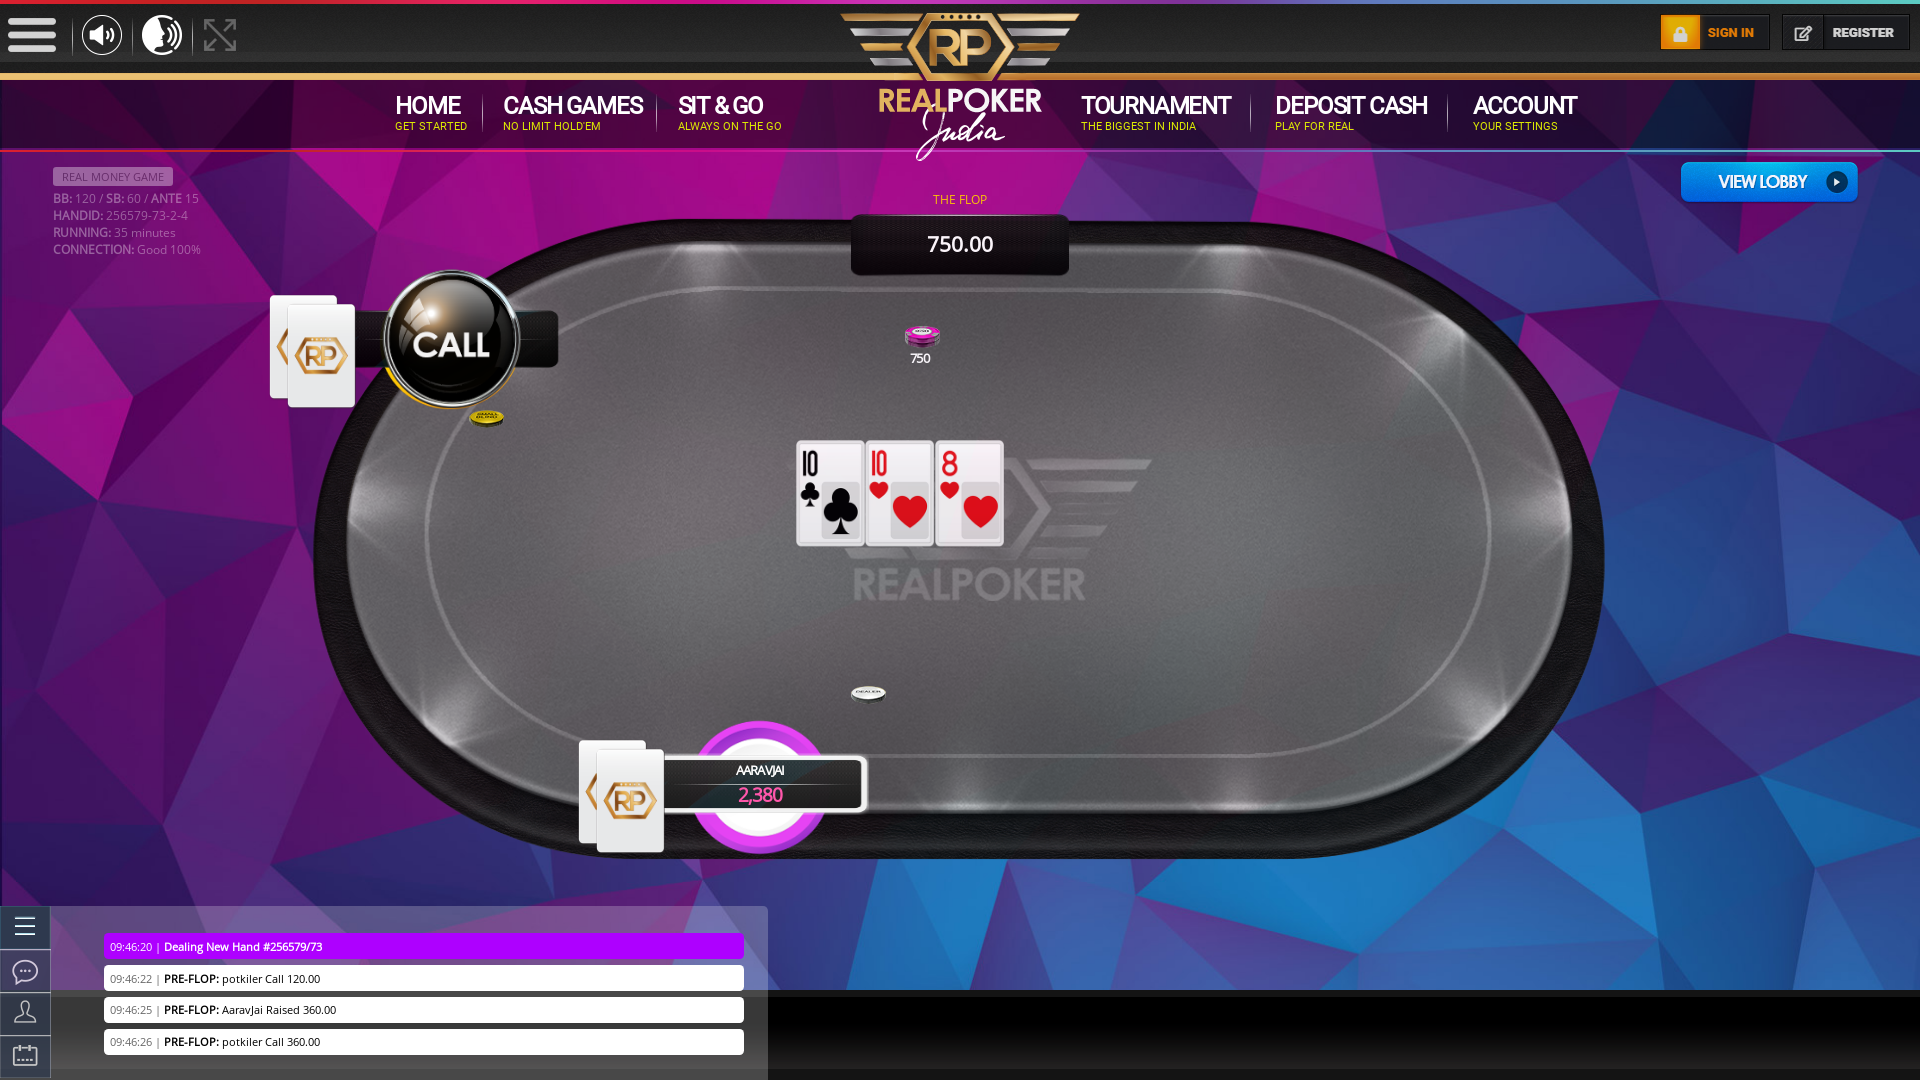 10 player texas holdem table at real poker with the table id 256579